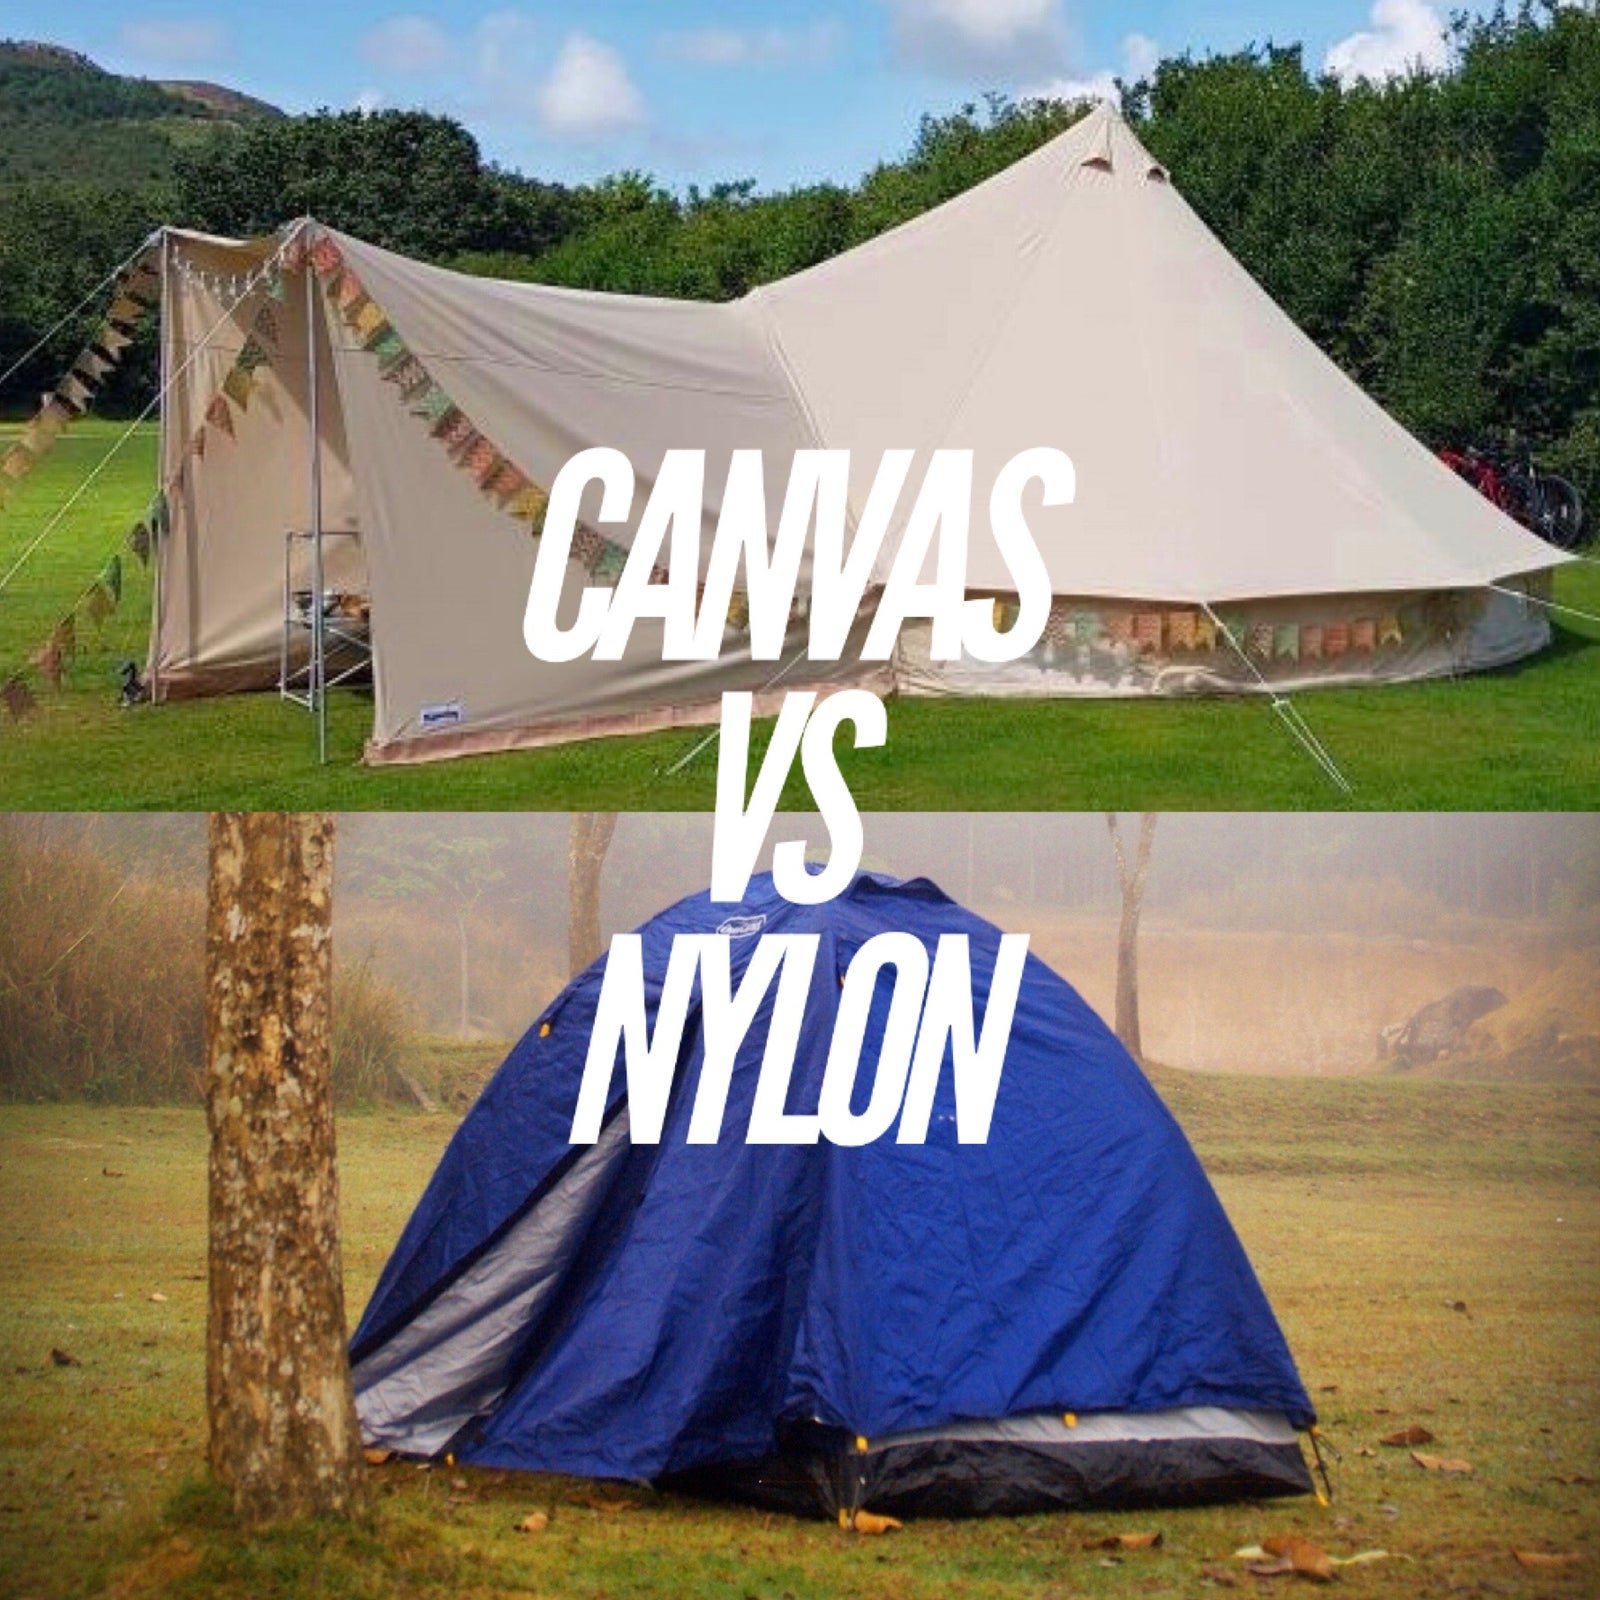 A canvas and a nylon tent with the text "Canvas vs nylon"